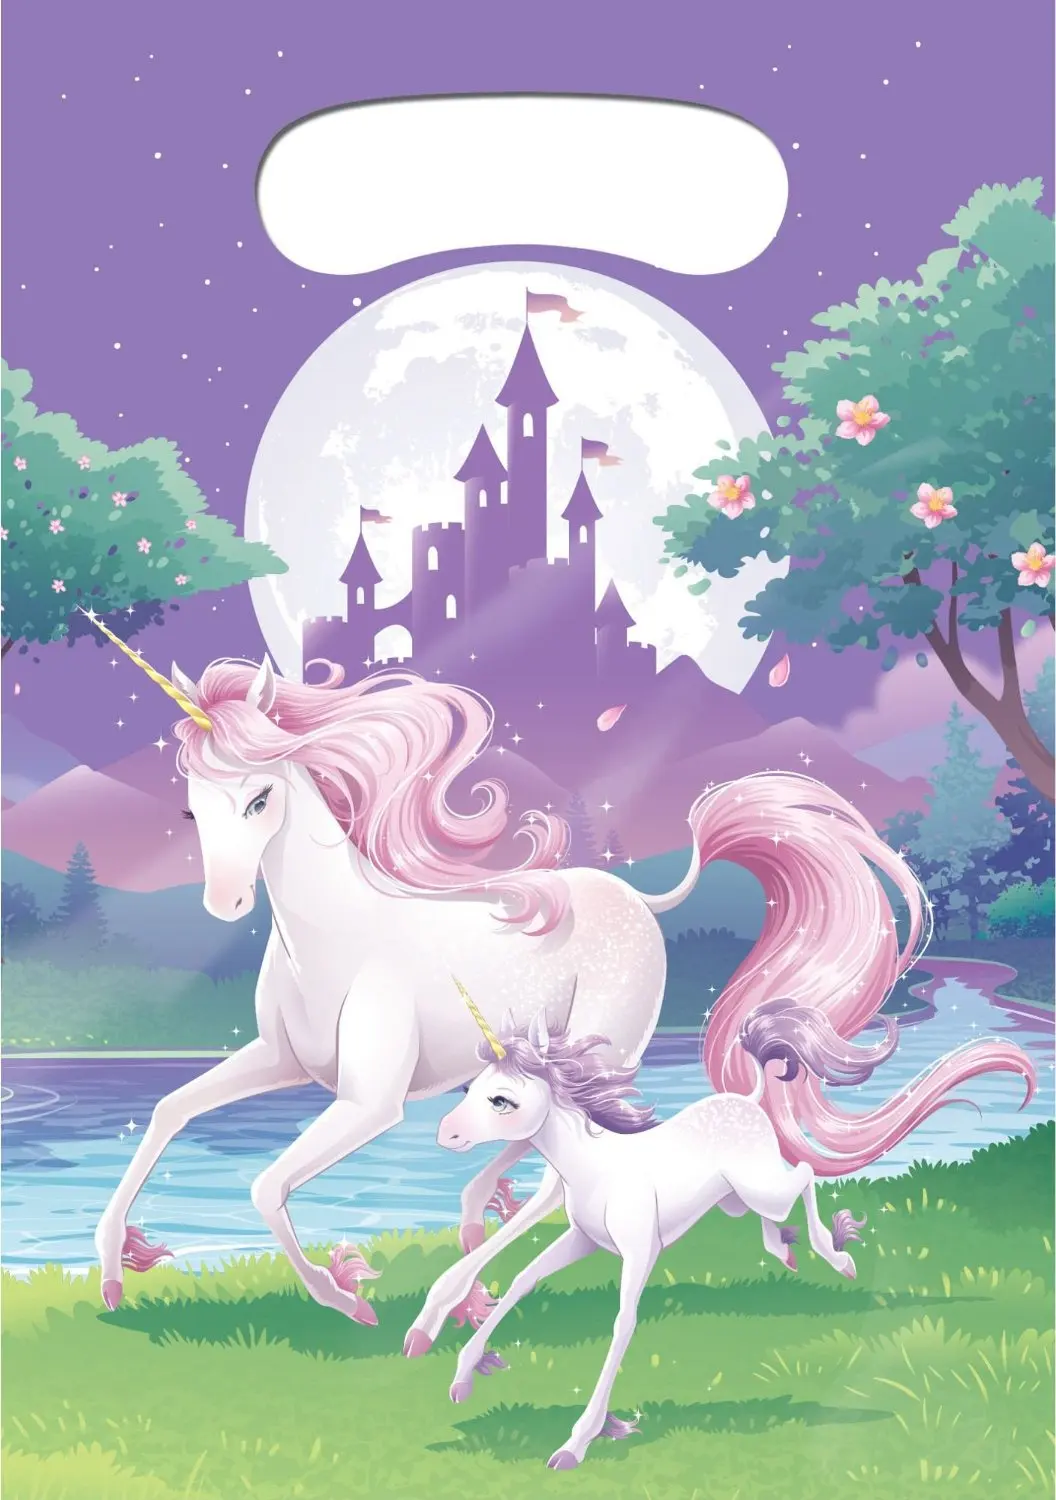 Package Quantity:1 Unicorn fantasy party treat bags. 